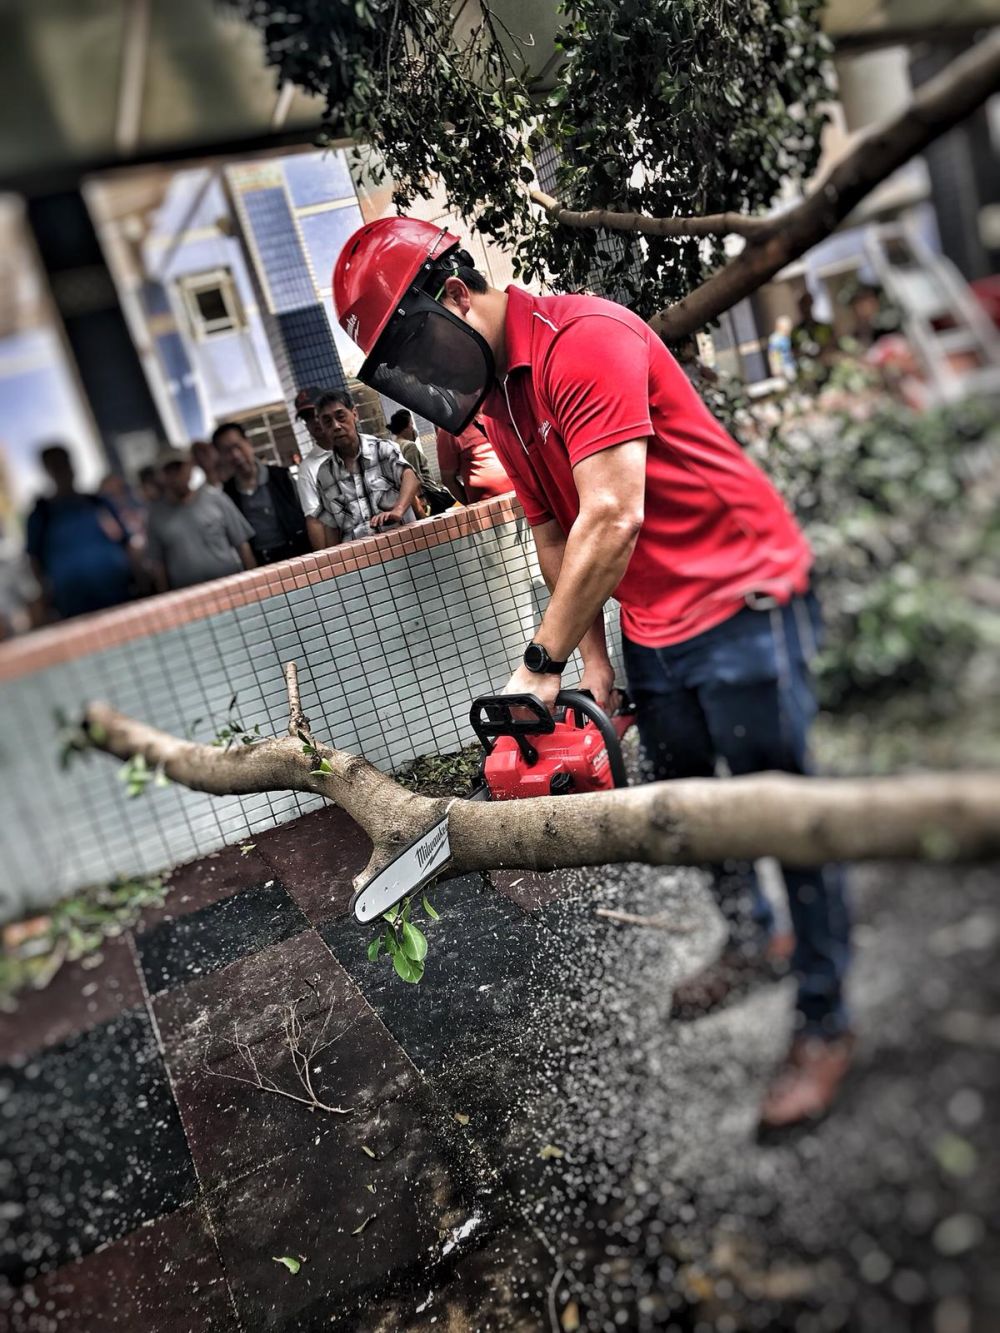 The volunteer team has started to help clean up fallen trees on streets in the urban areas since last Tuesday. They also went to some remote areas to help remove rubbish. Pictured is a volunteer handling a broken tree at another site on Hong Kong Island.